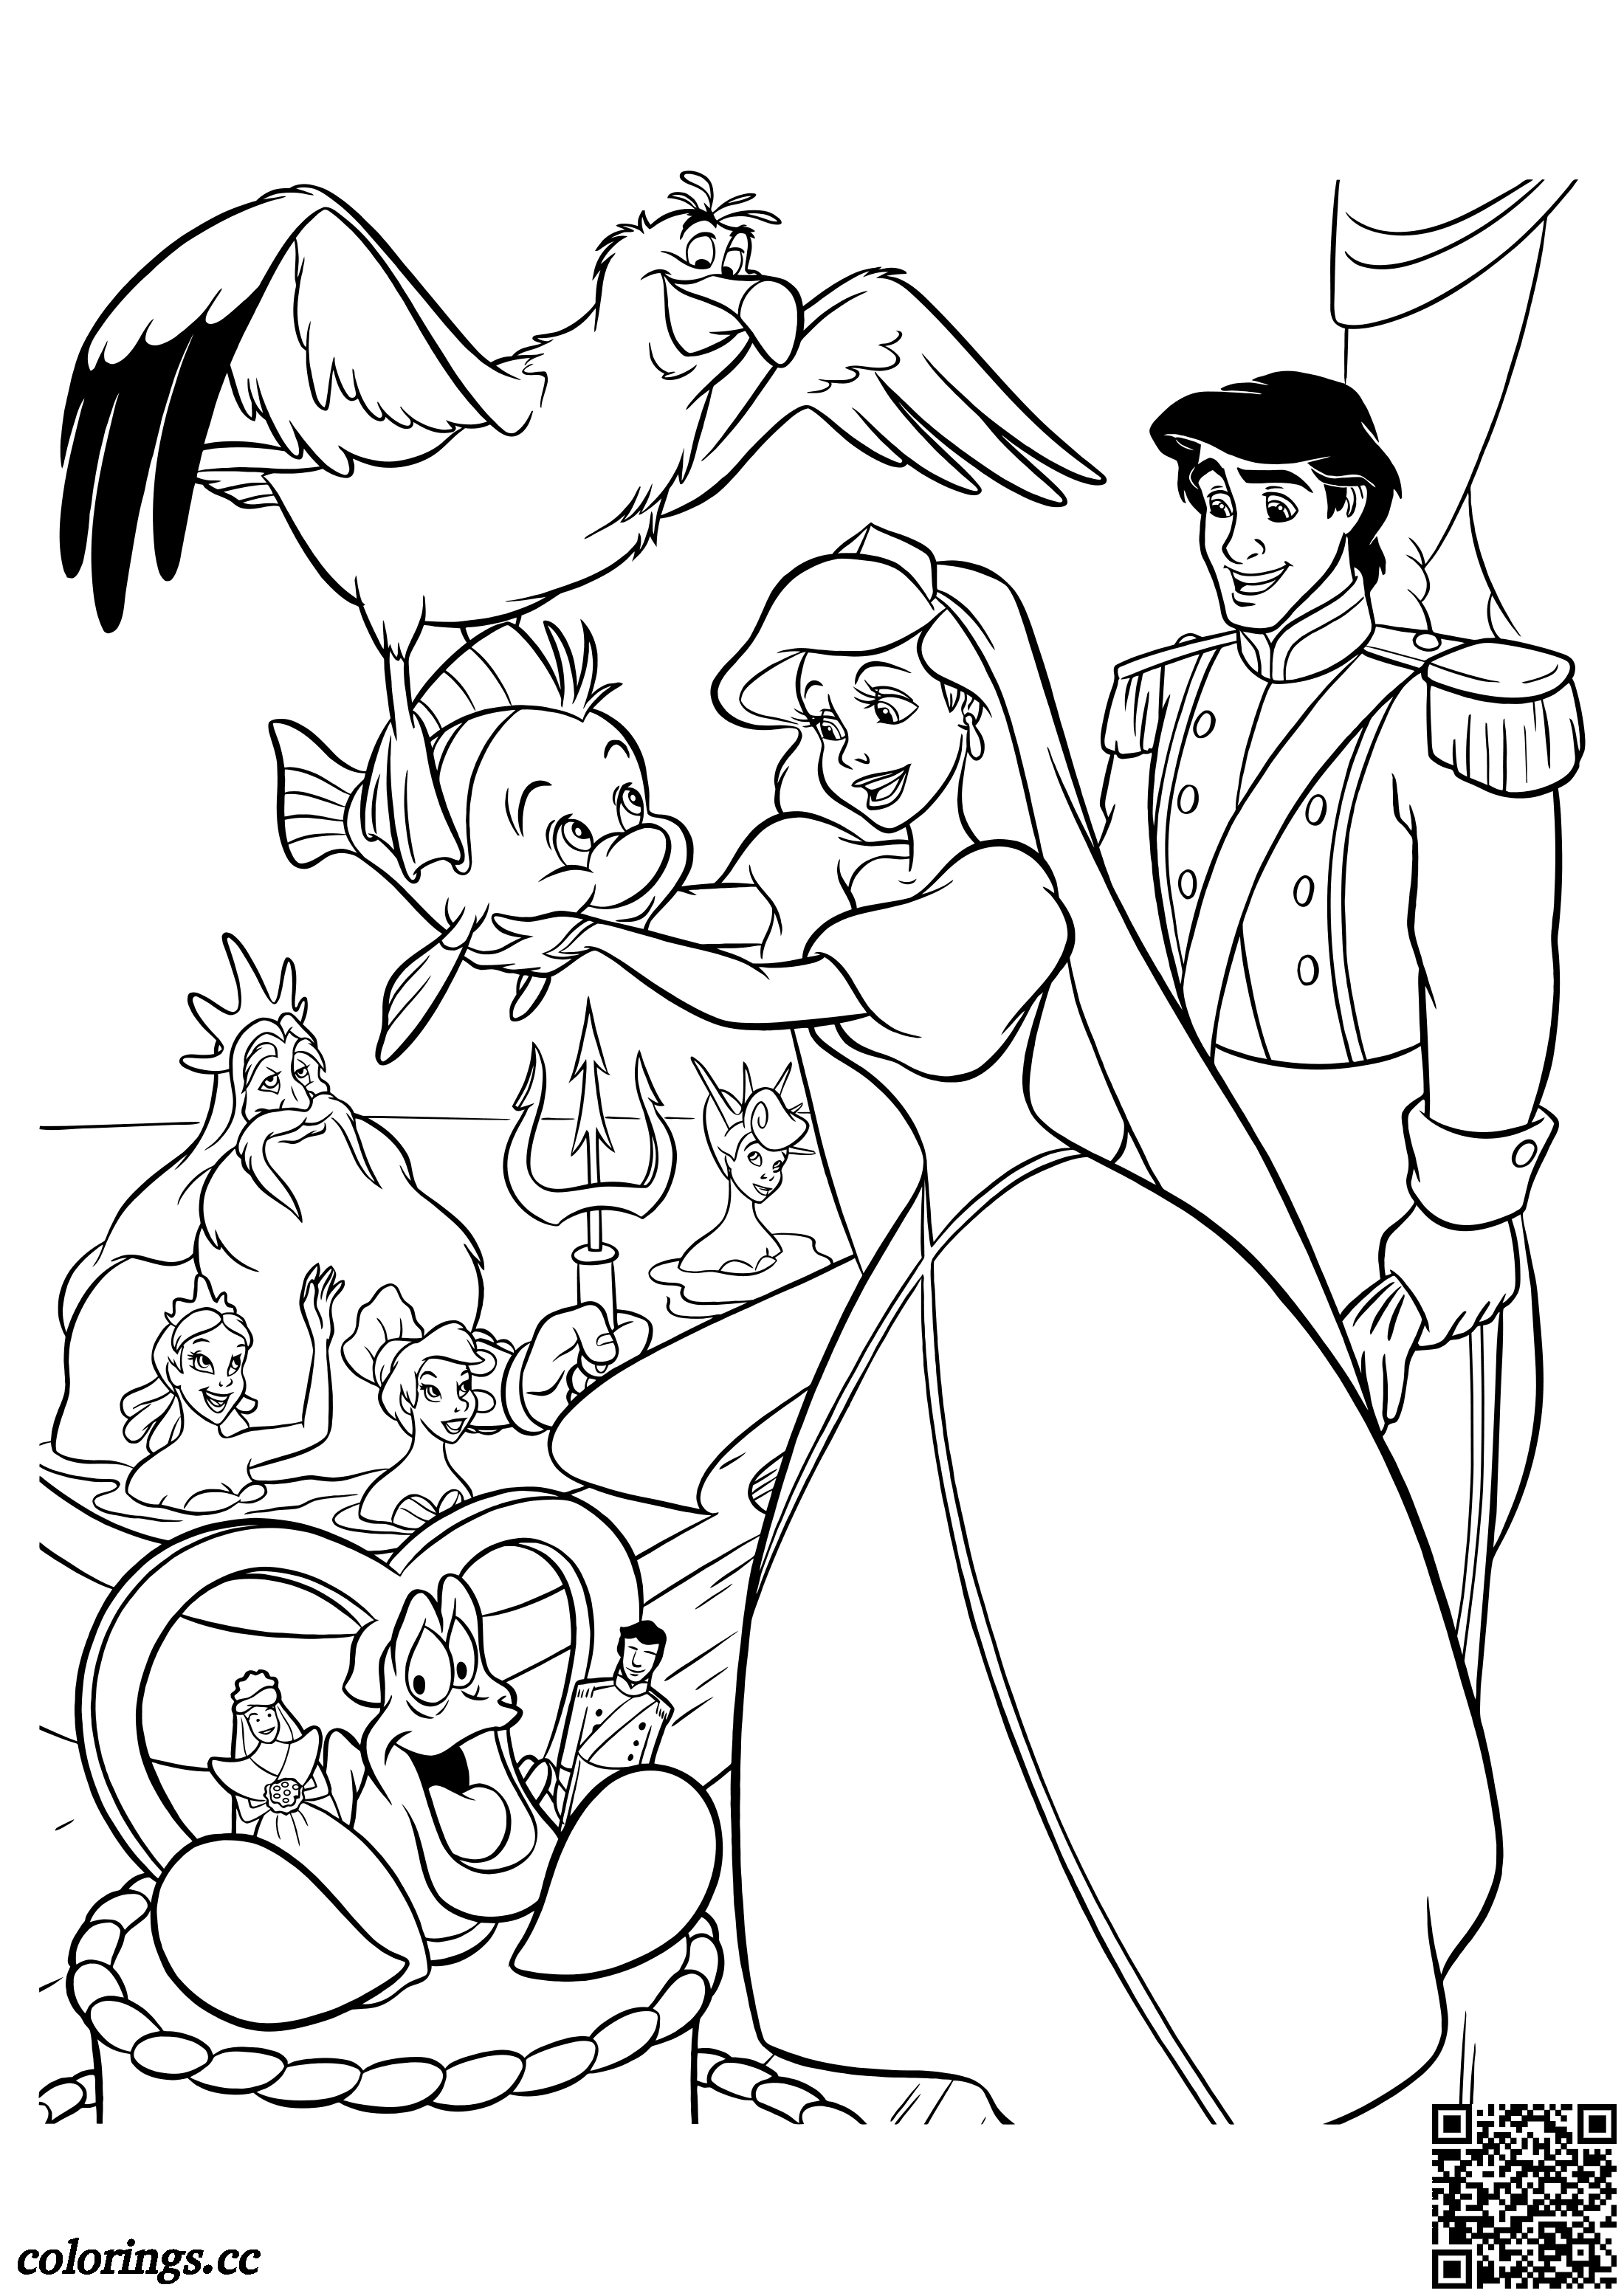 Wedding Ariel and Eric coloring pages, Mermaid coloring pages ...